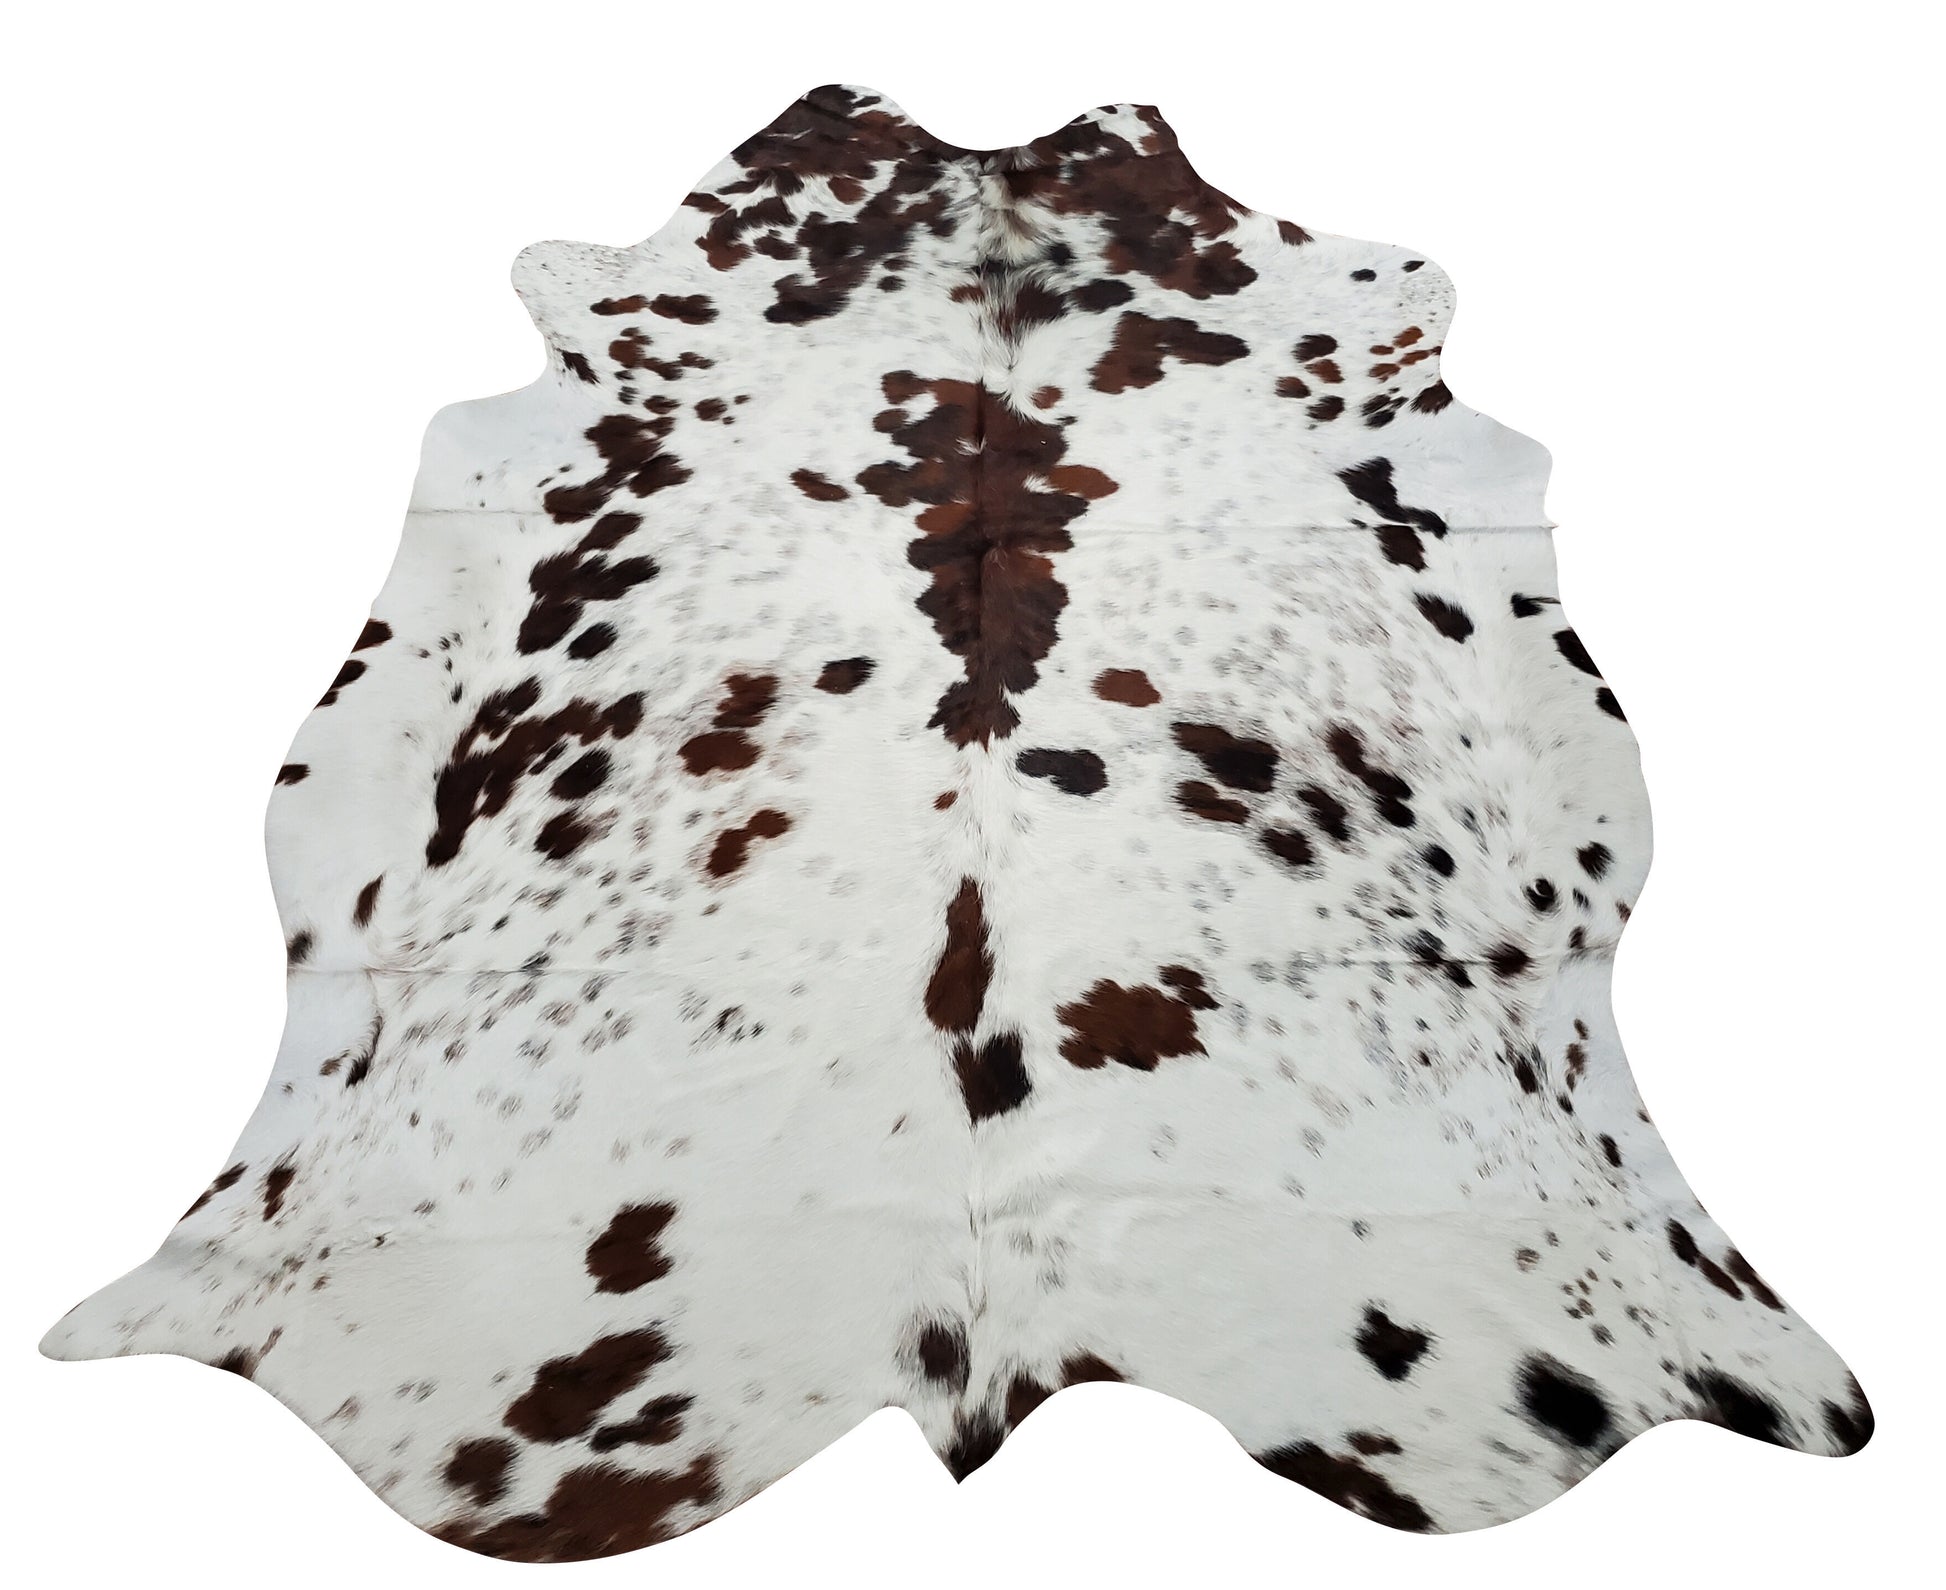 Beautiful Brazilian cowhide, great quality, no weird odor and wrinkle free, free shipping USA, real, natural and extra large, great size for a bedroom.